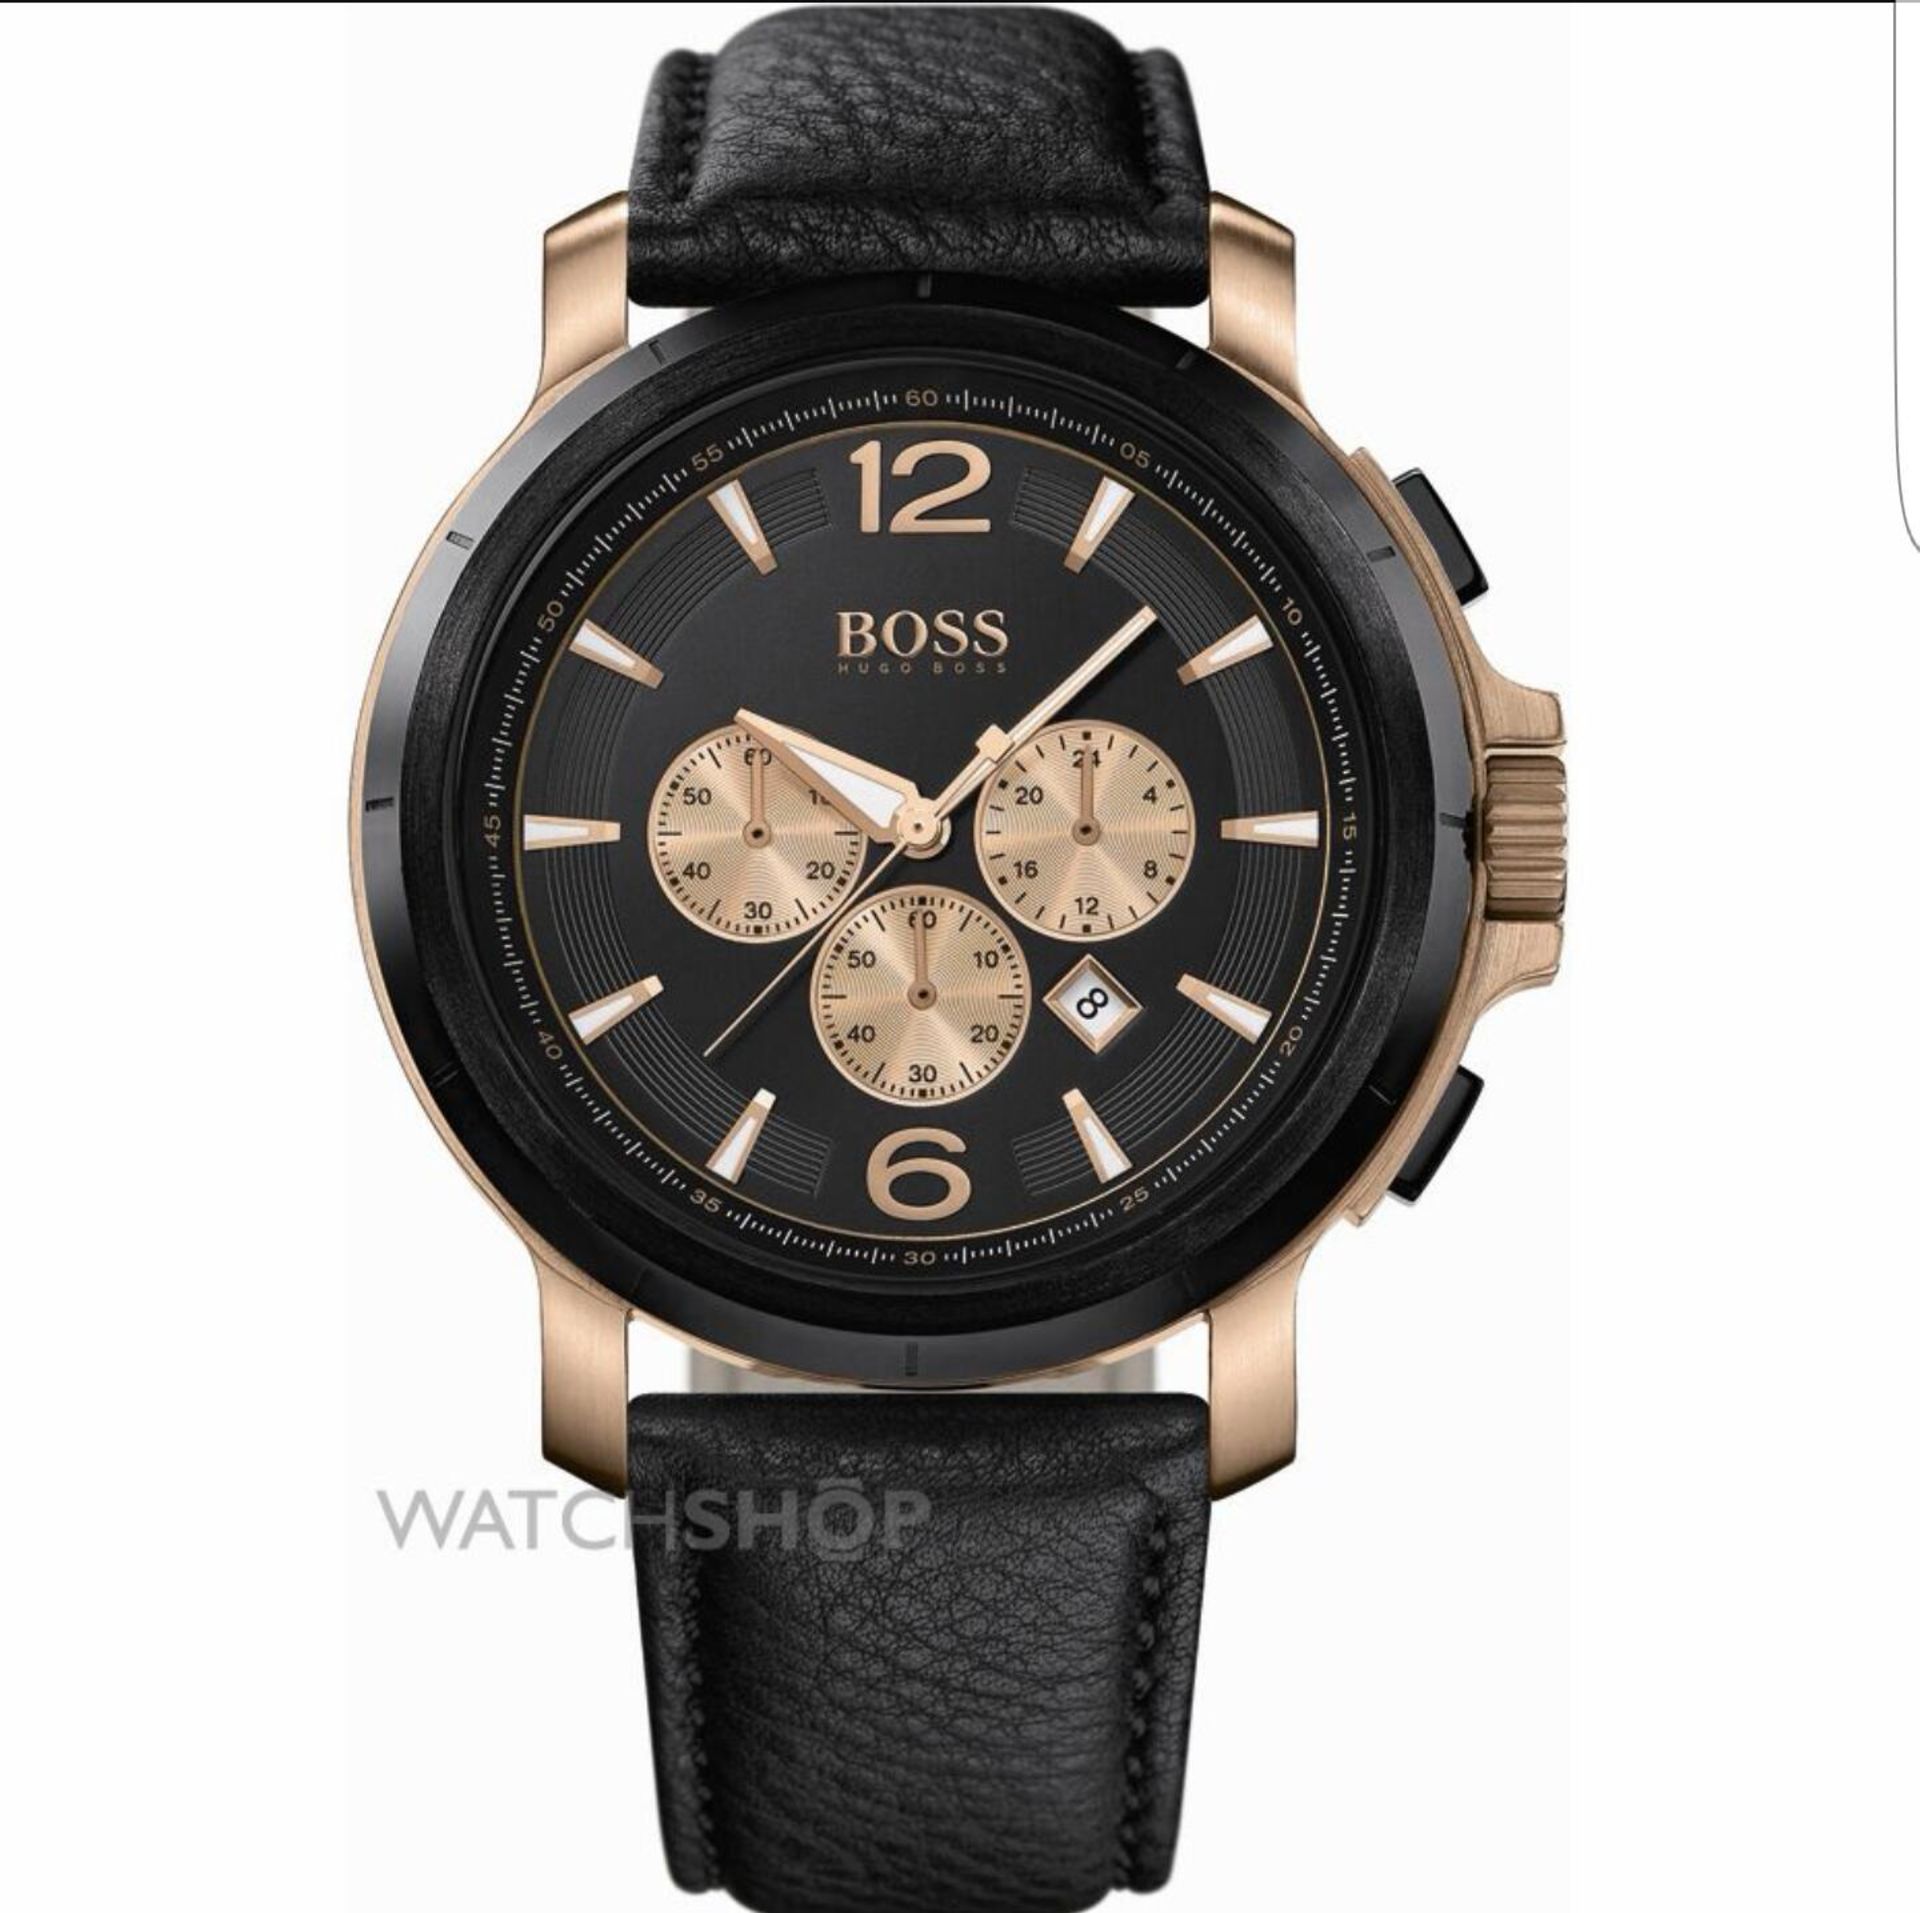 BRAND NEW HUGO BOSS 1512457, GENTS DESIGNER CHRONOGRAPH WATCH WITH ORIGINAL BOX AND BOOKLET - RRP £